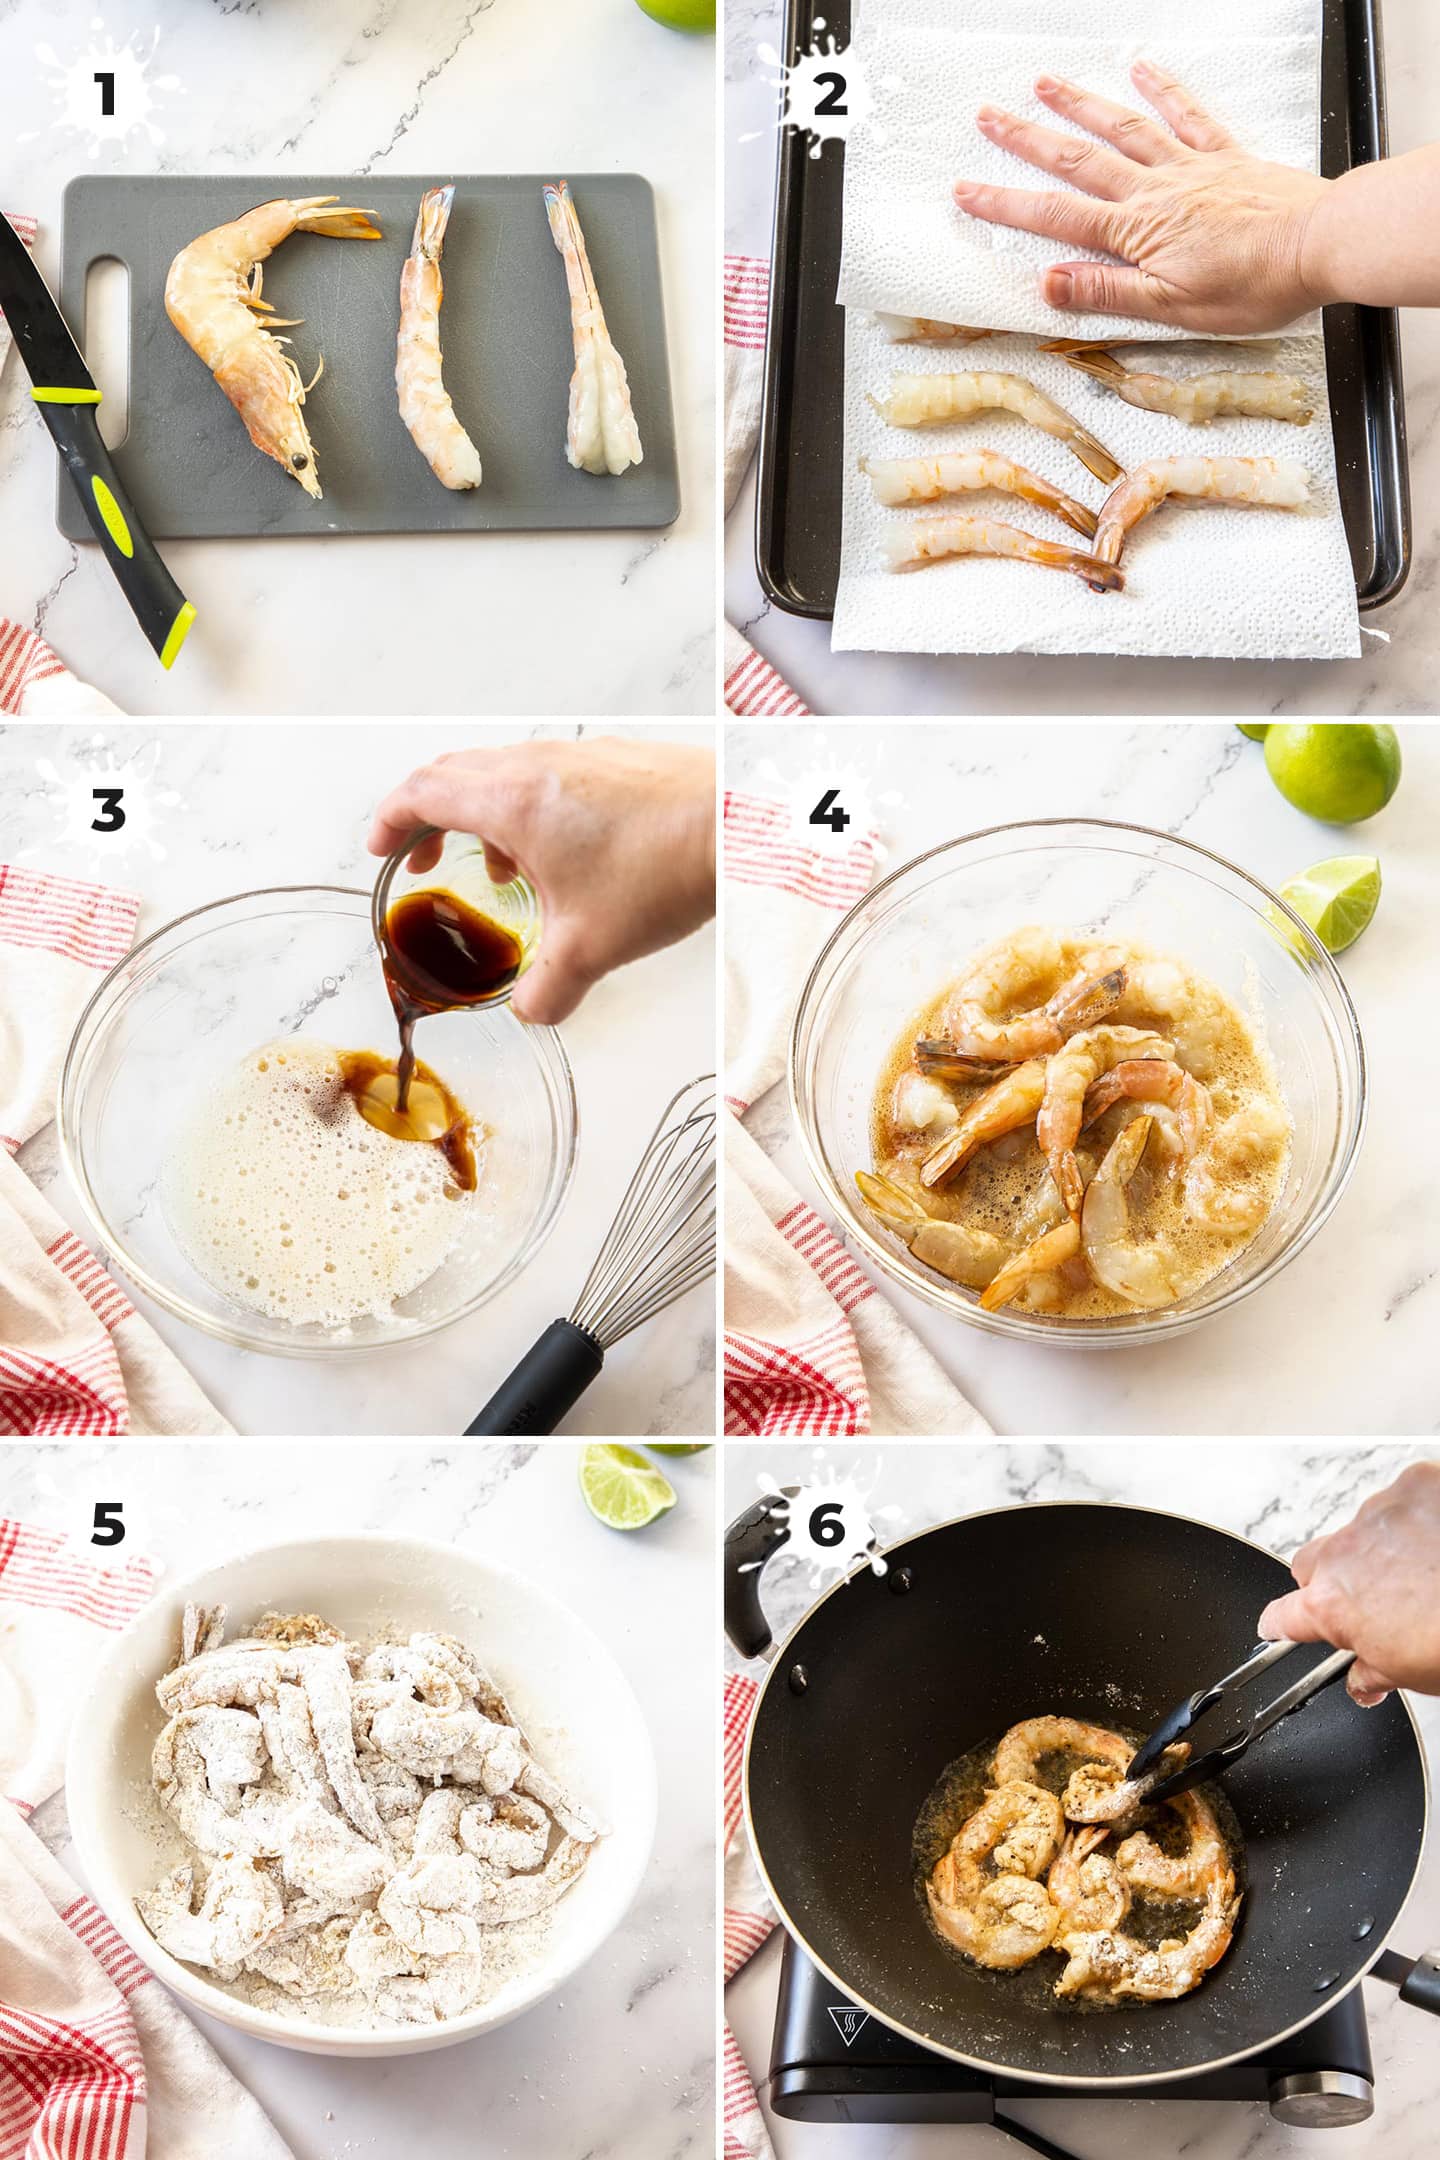 A collage of images showing steps to make salt and pepper prawns.